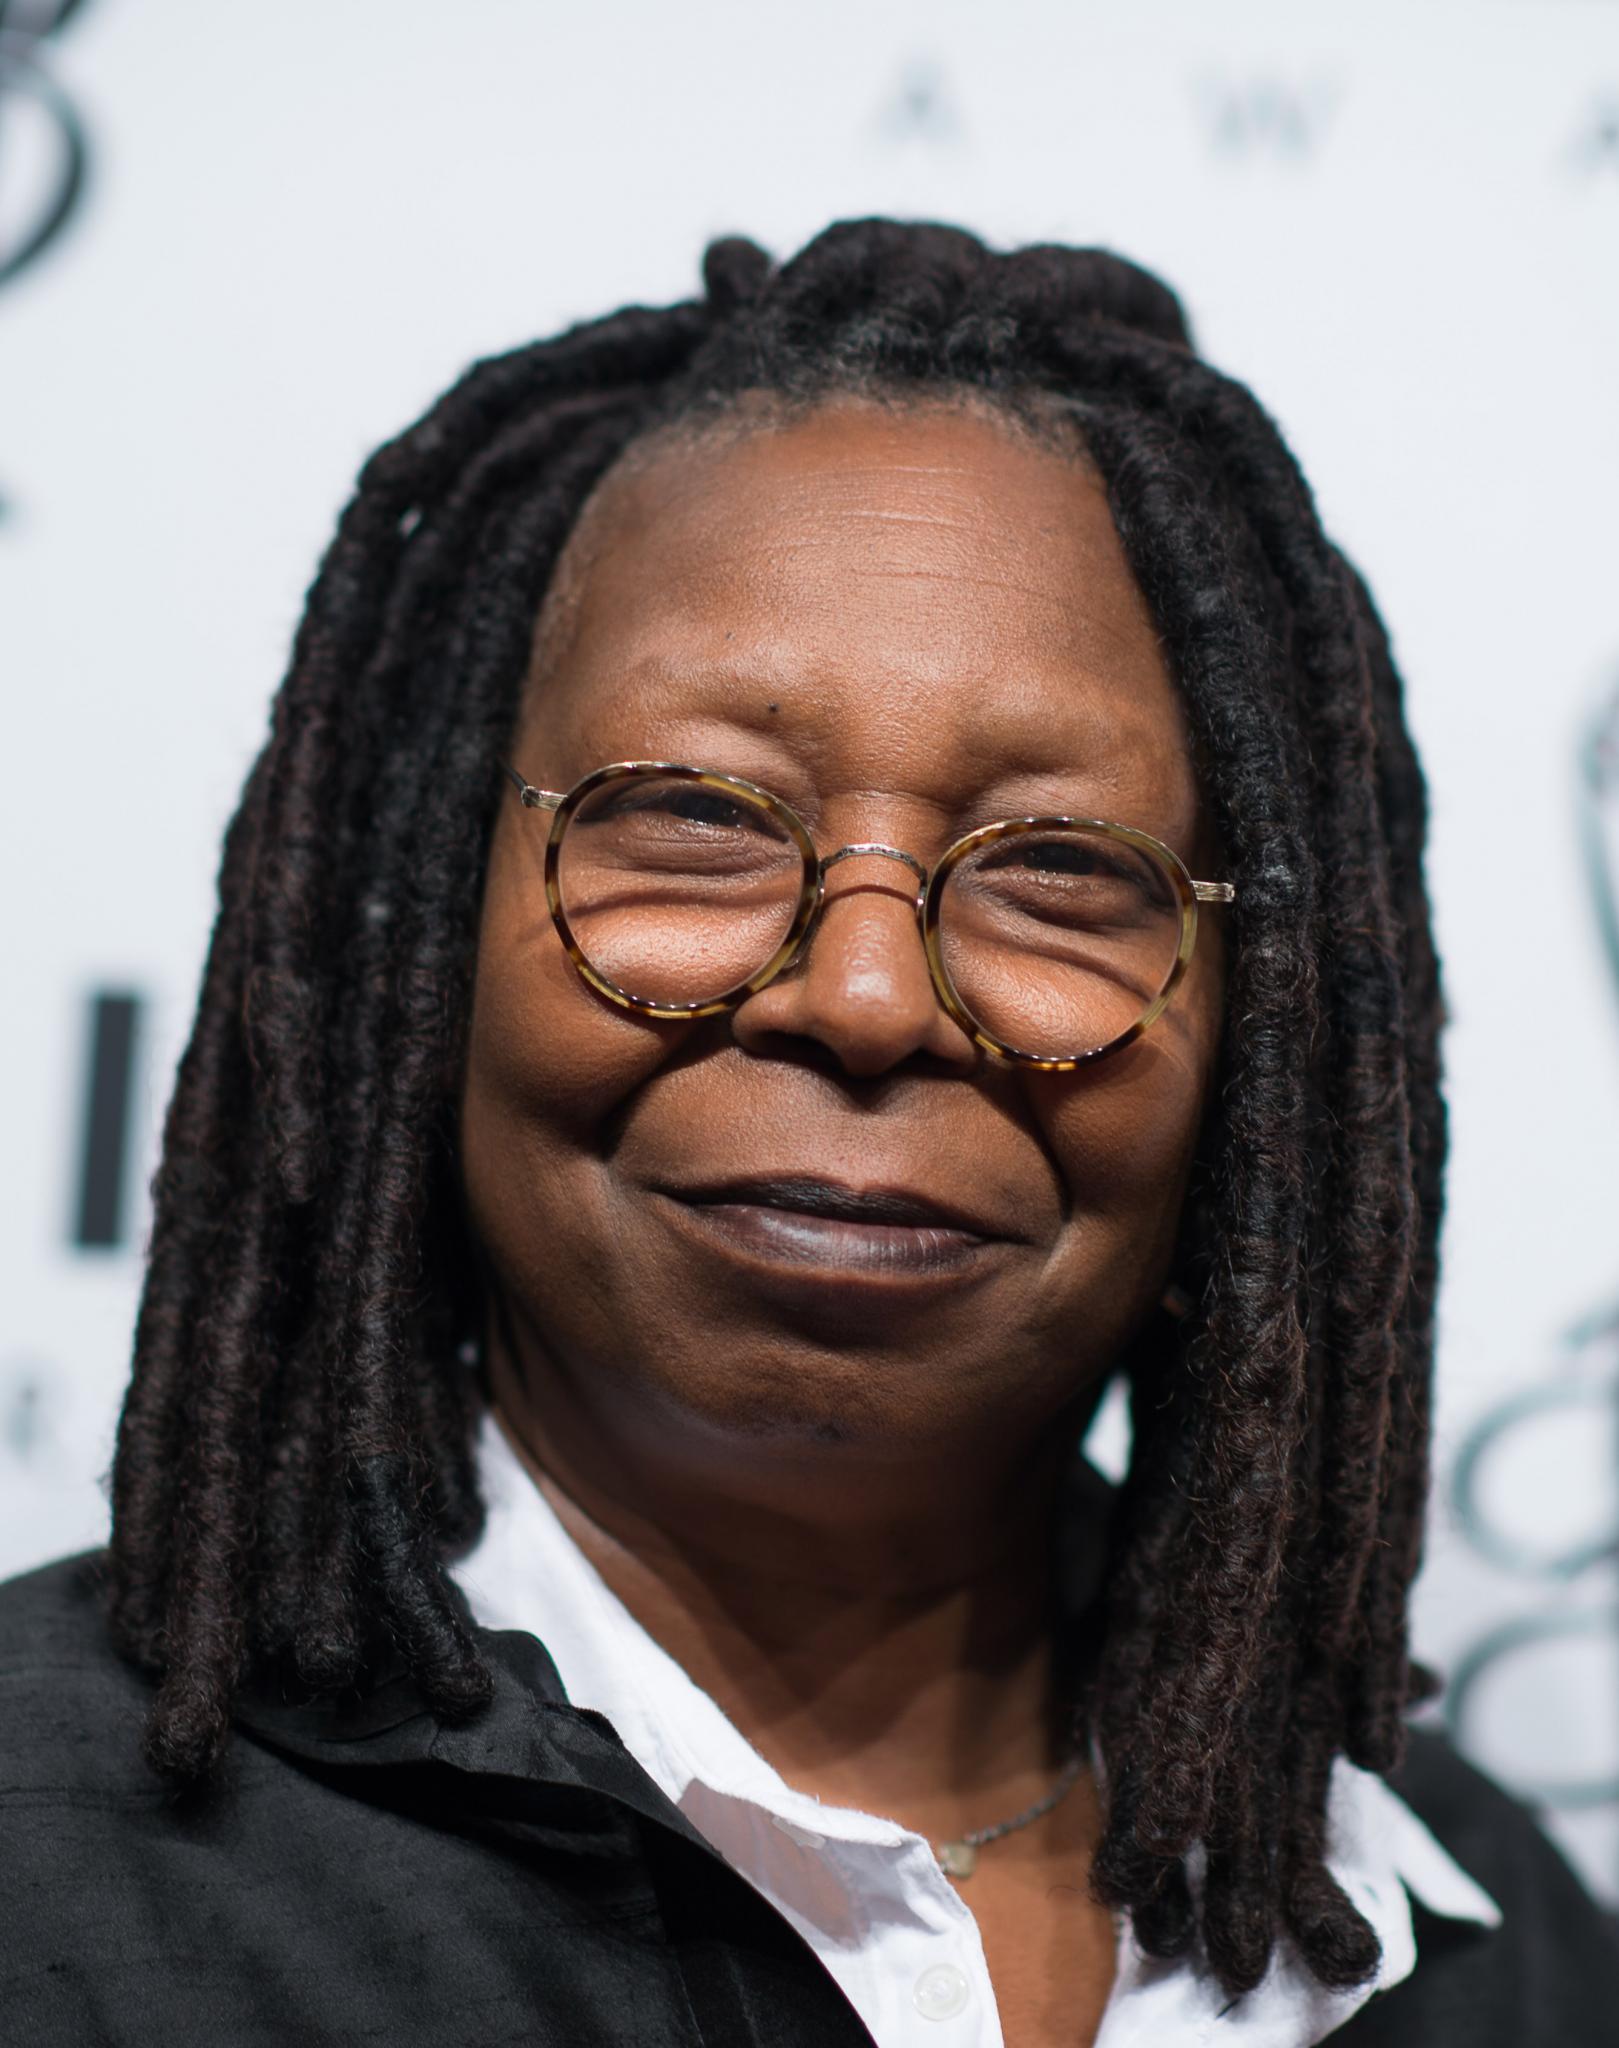 Whoopi Goldberg Disagrees with Viola Davis' Emmy Speech: 'There's Plenty of Opportunity'